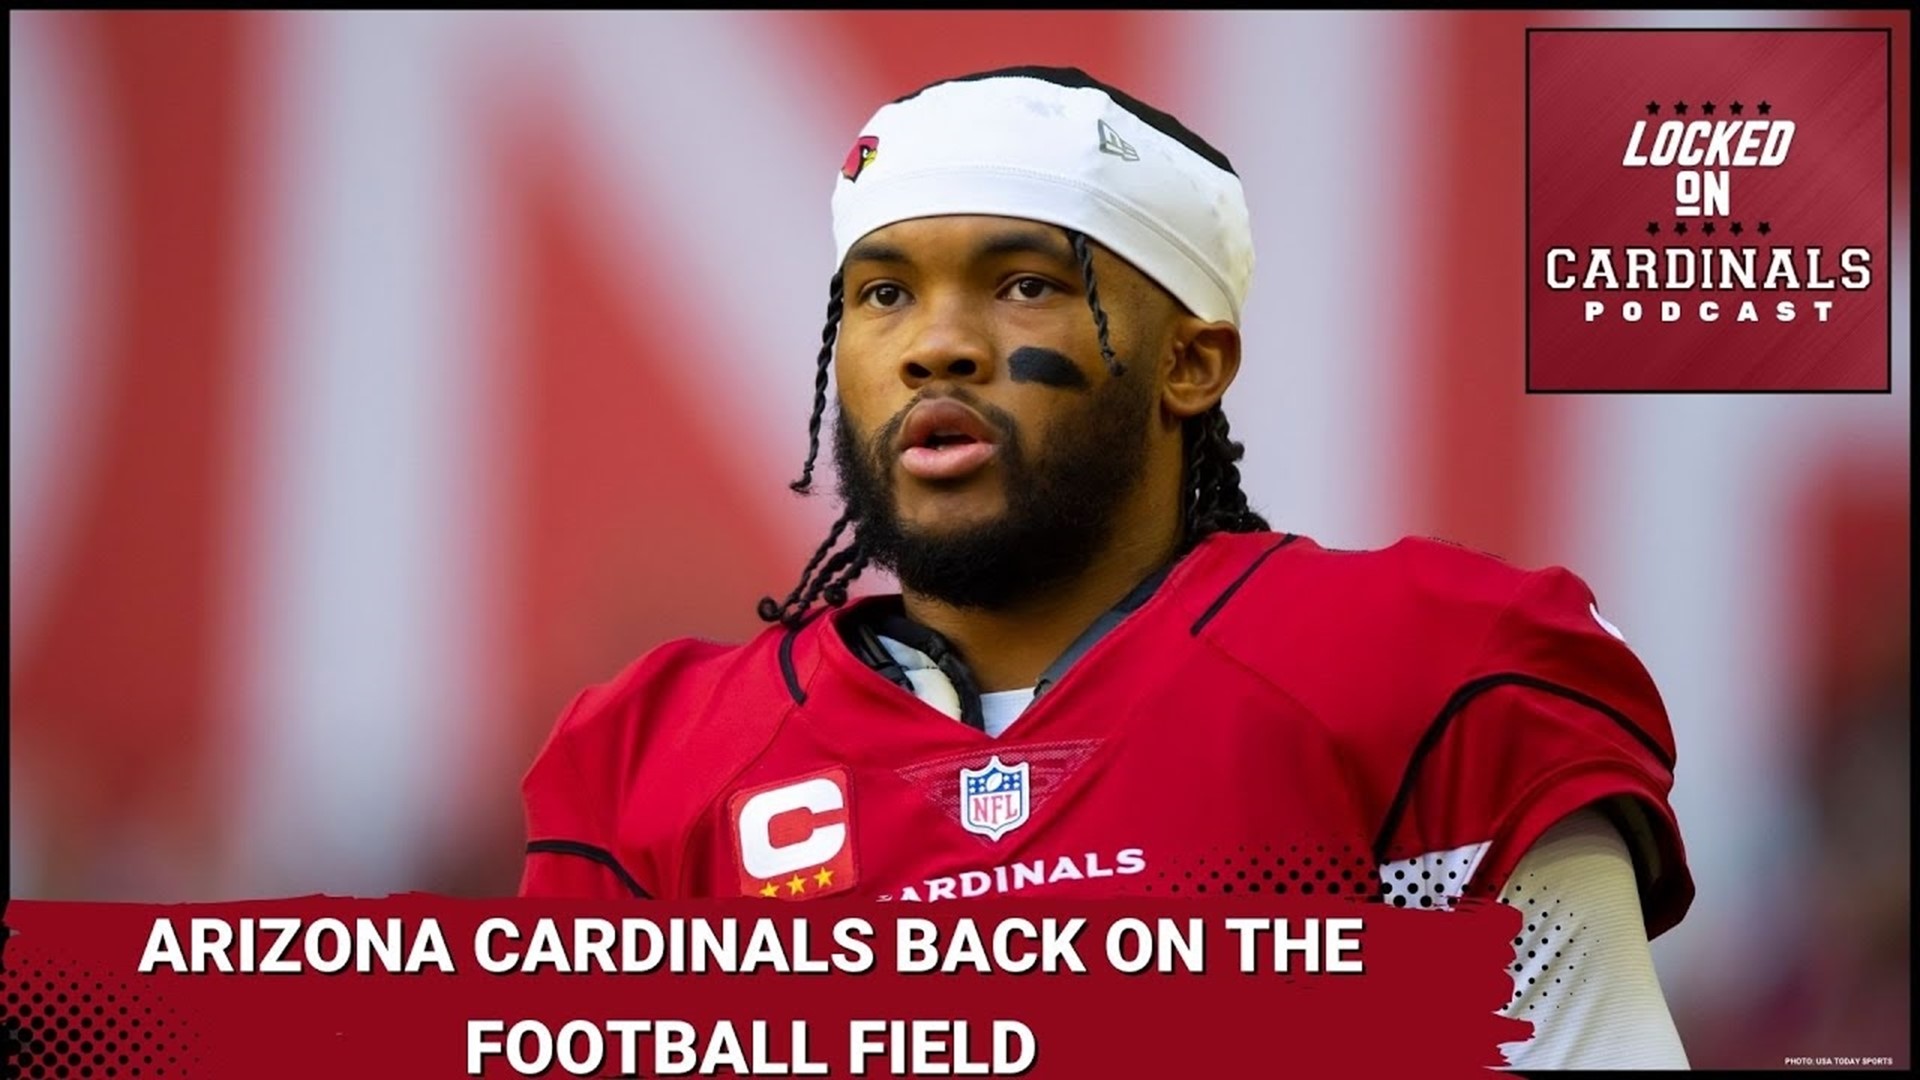 Arizona Cardinals voluntary OTAs started today, and it's important the team does things the right way to rebuild the foundation of the organization.